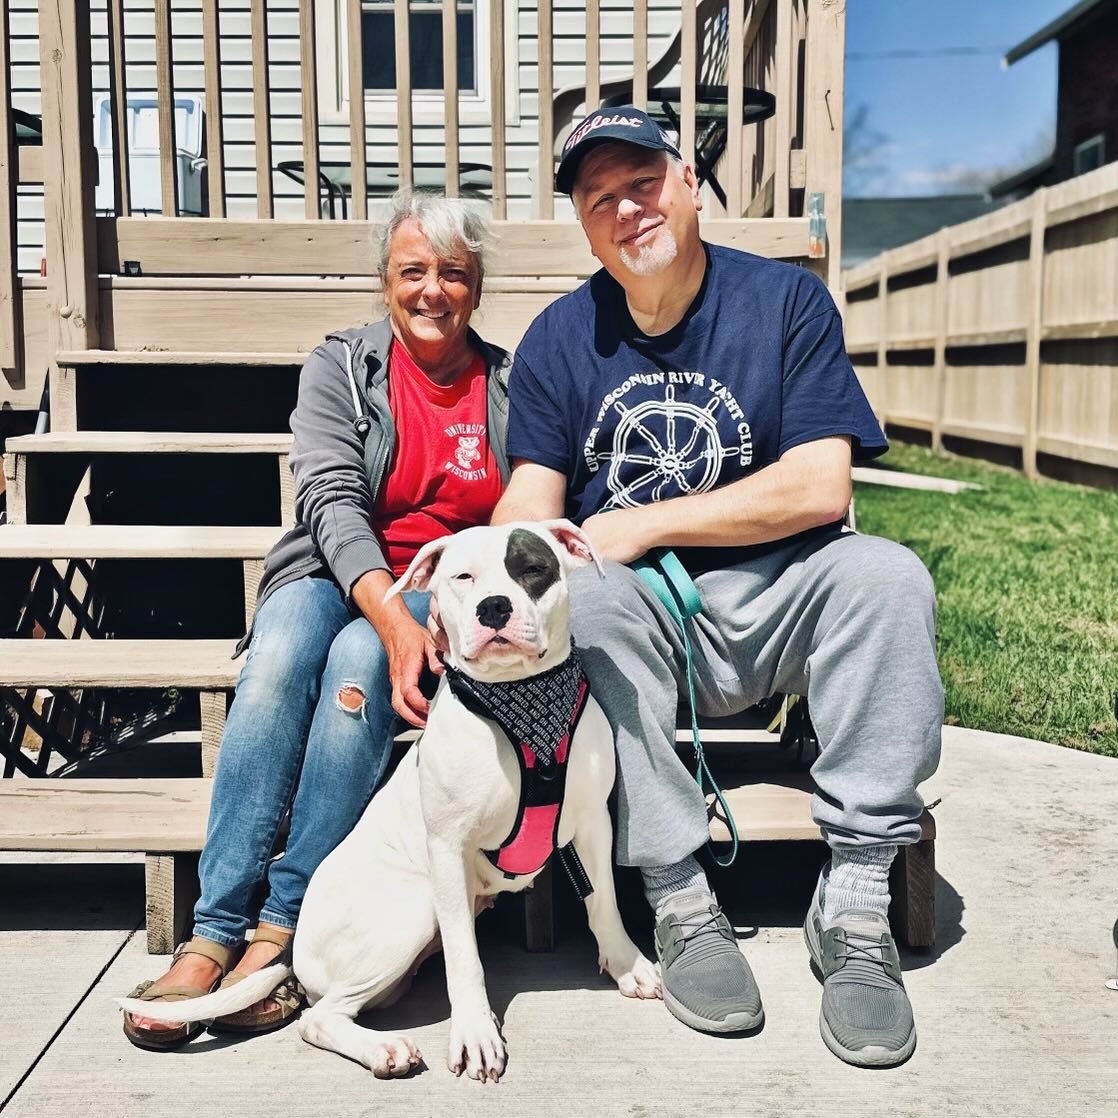 We are so excited to announce that Miss Darla has found her happily ever after! 🤩

Since going to her wonderful foster home she has gained about 25 lbs, her skin has fully healed, and she was able to learn how to be a dog. Fostering truly saves live